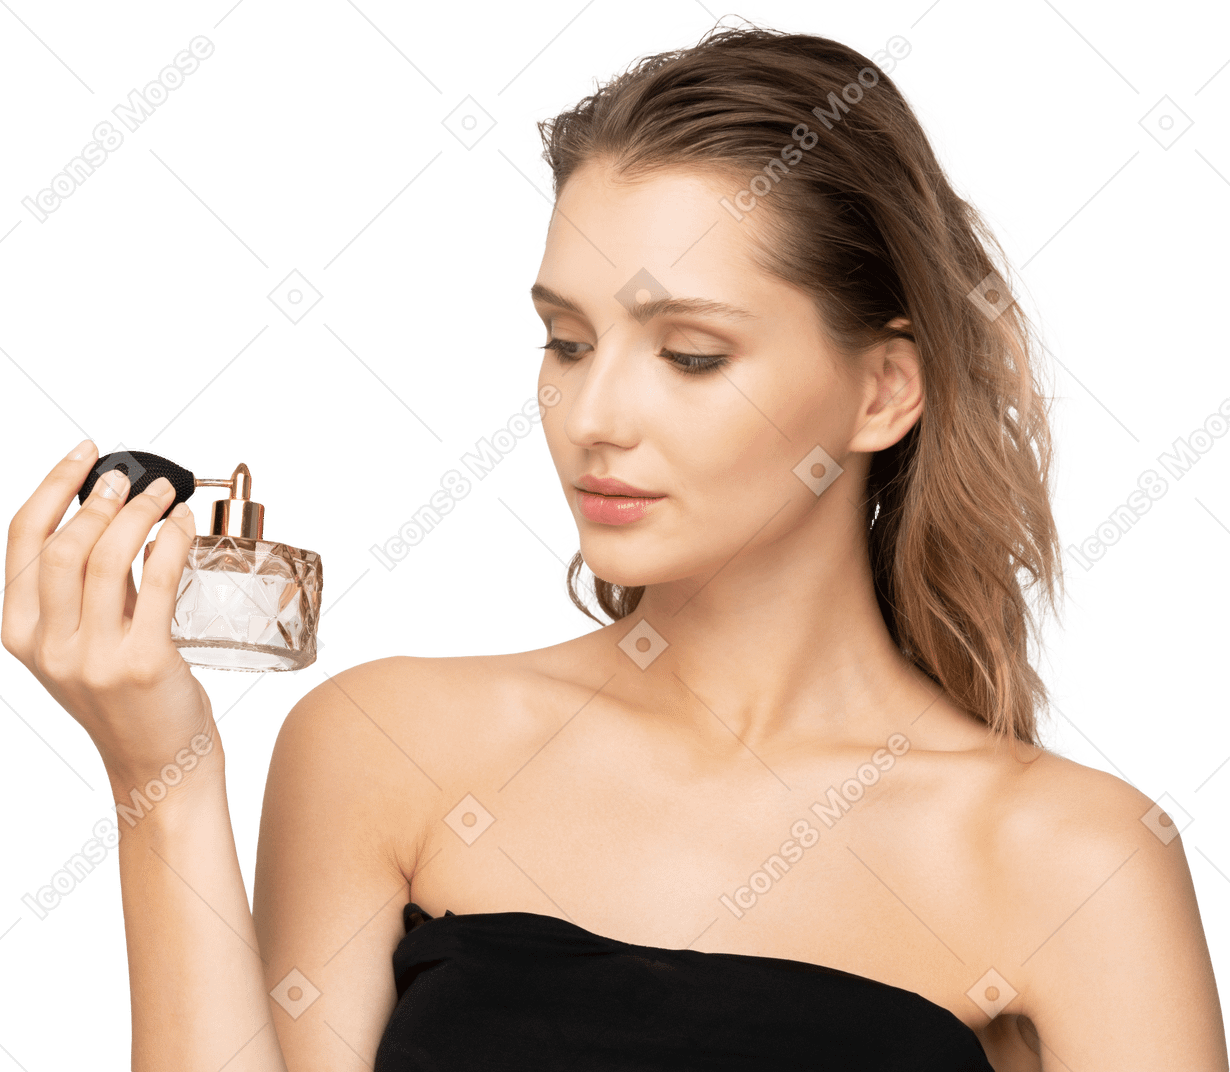 Front view of a sensual young woman holding a bottle of perfume